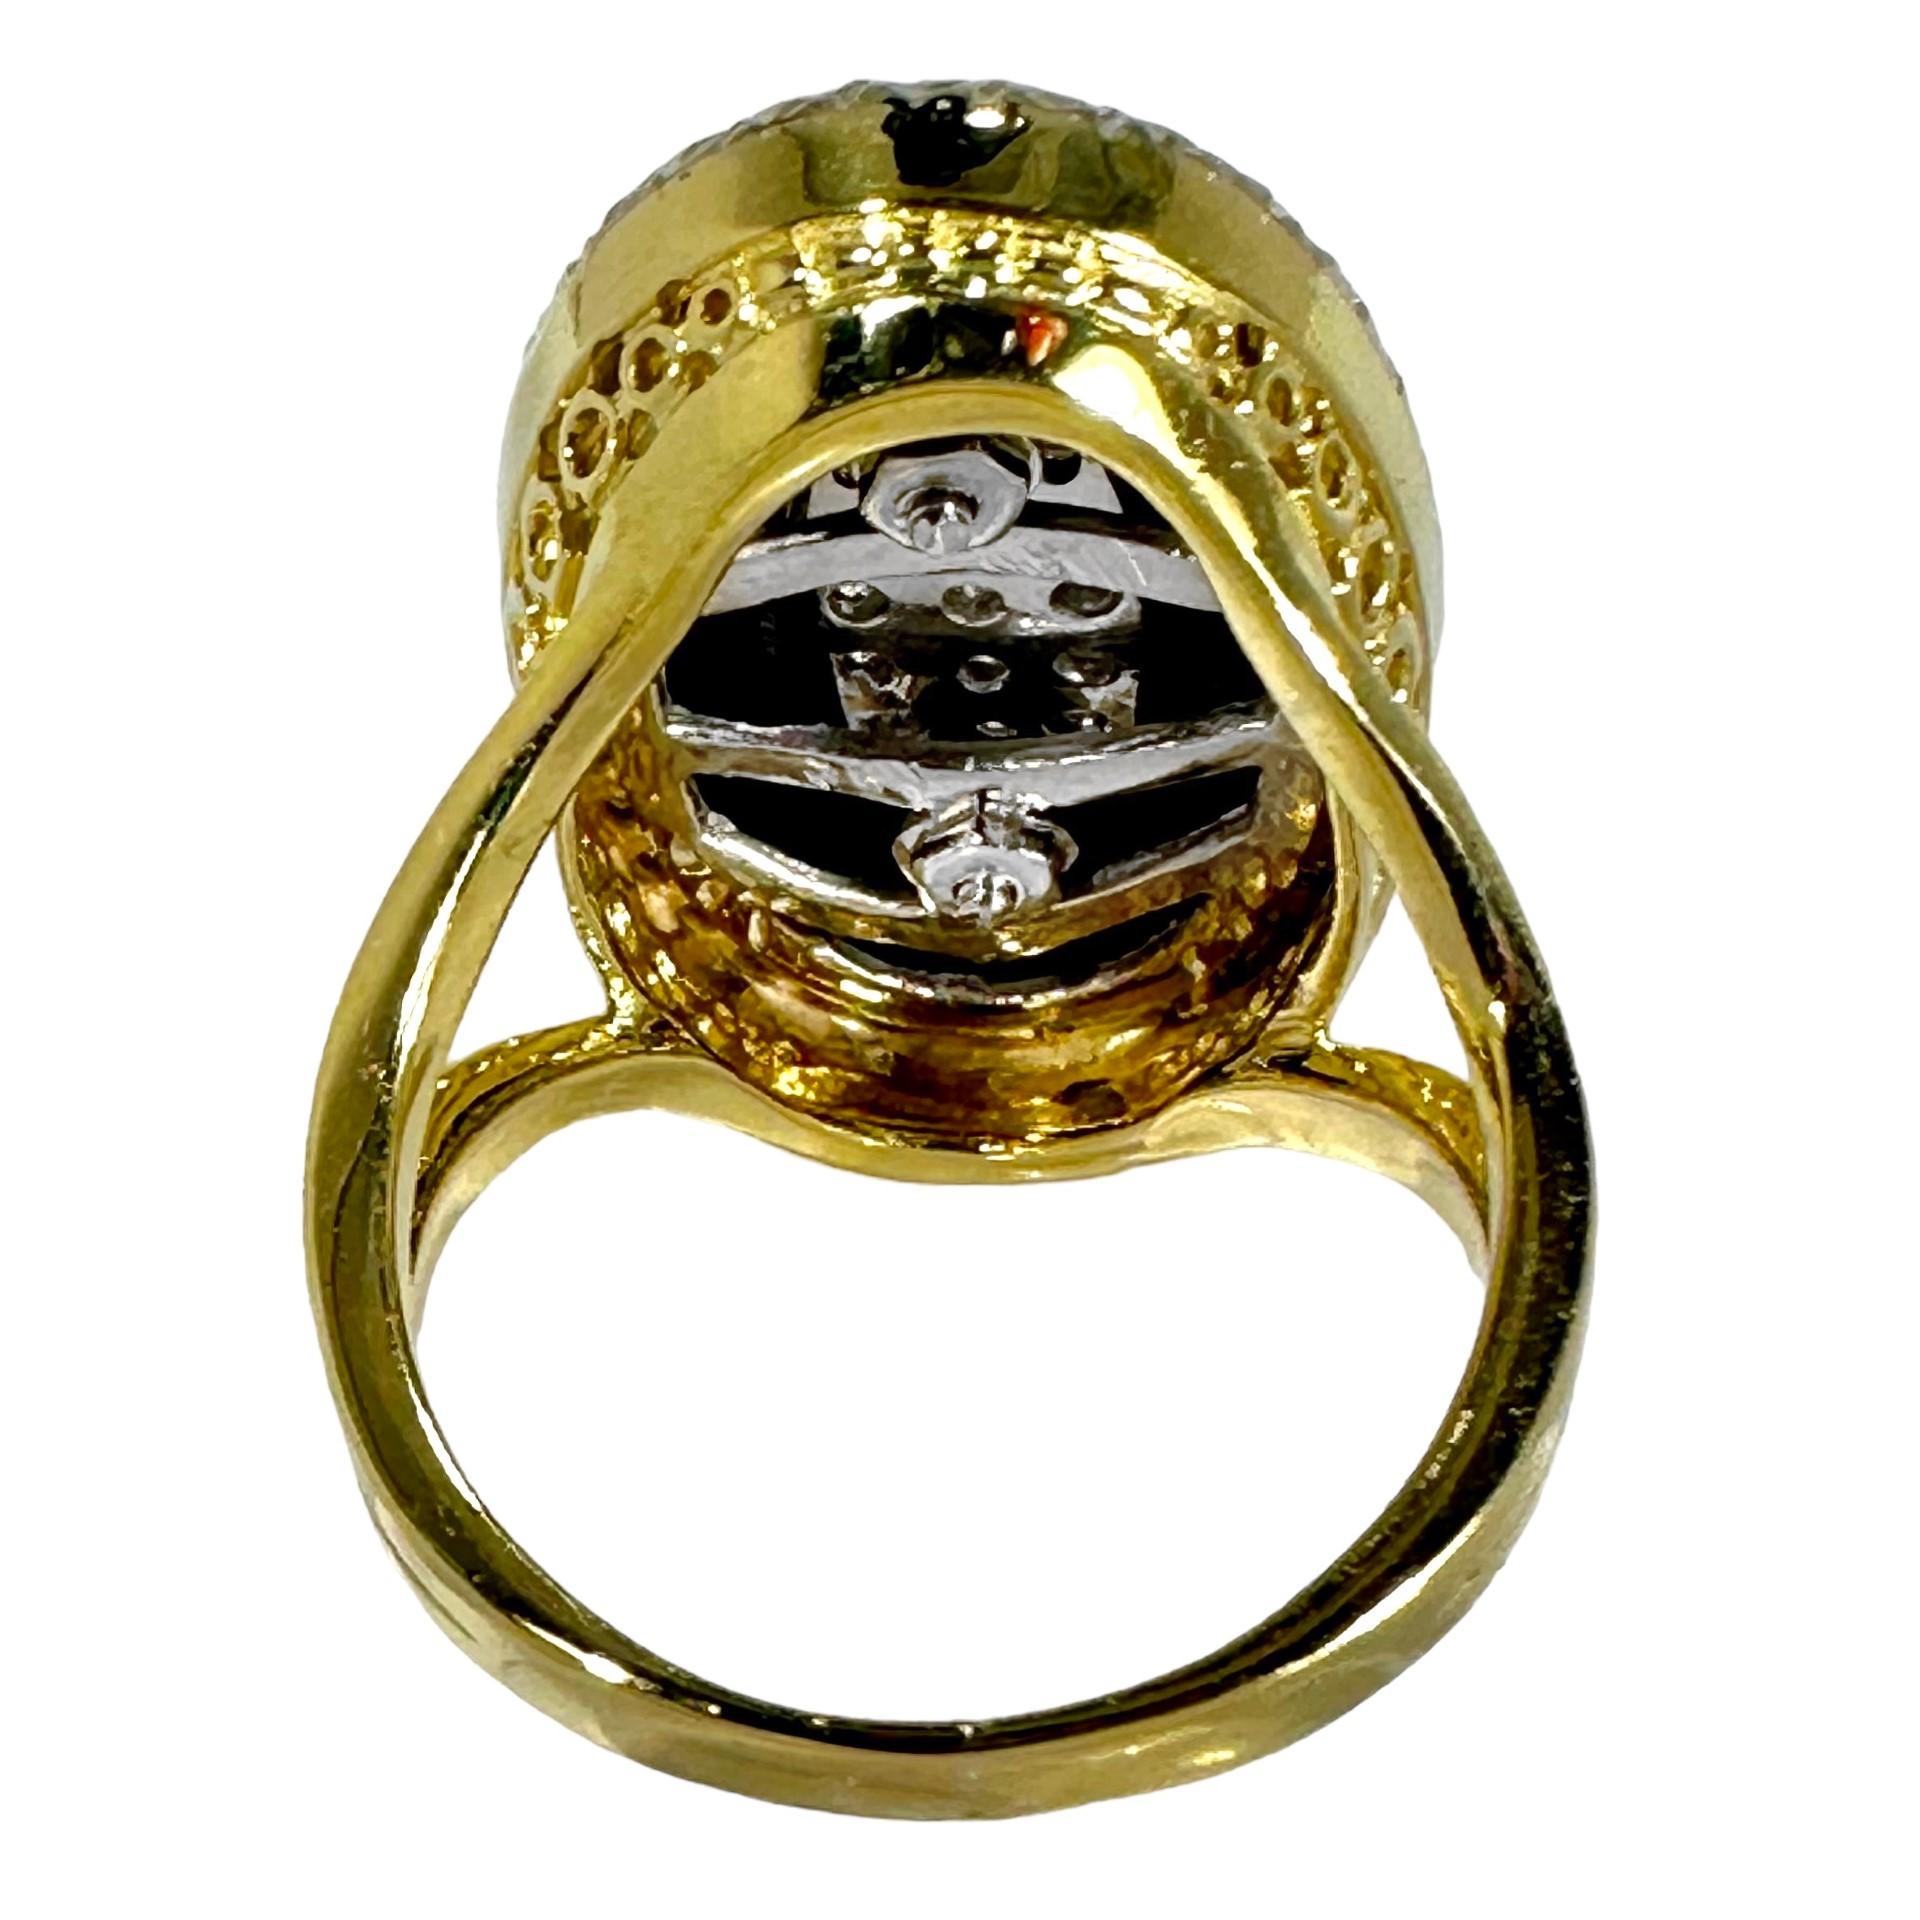 Round Cut Onyx, Diamond and 18K Gold, Oval Shaped Ring 1 Inch Long x 5/8 Inch Wide For Sale